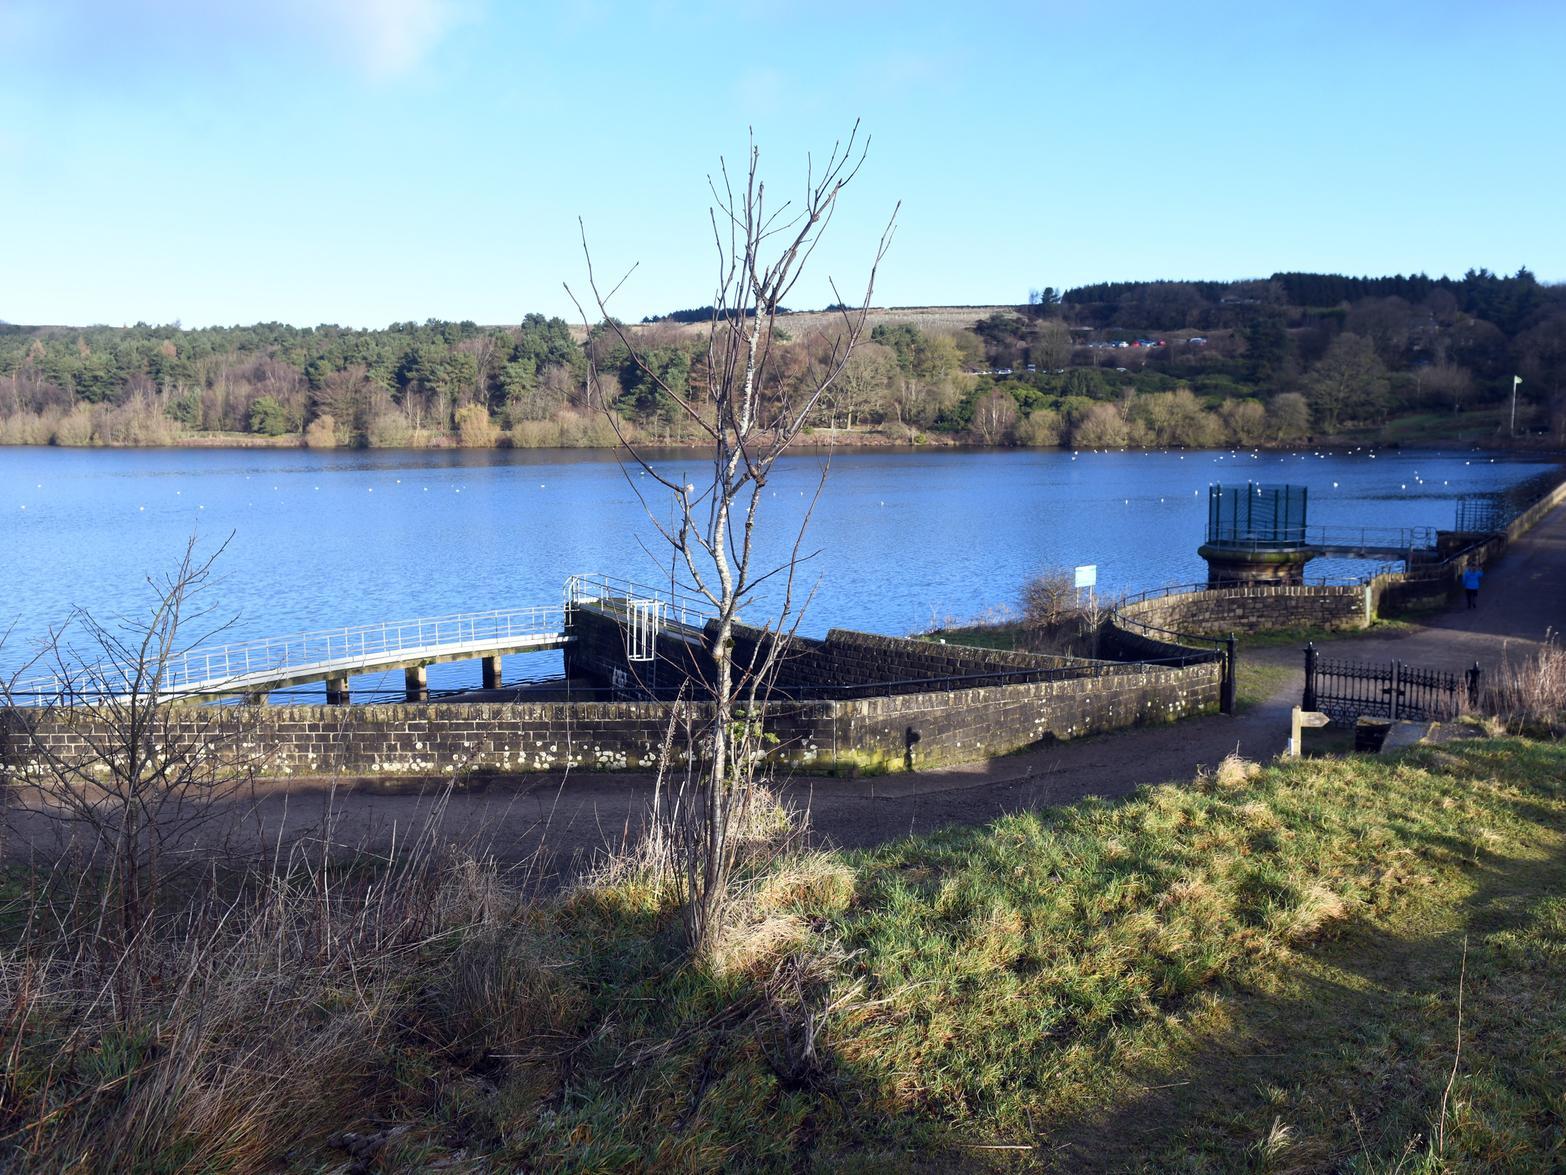 Ogden Water Country Park and Nature Reserve is a great place to enjoy a wintery walk during February half term. Take a stroll through the woodland or around the water for a wonderful day out.